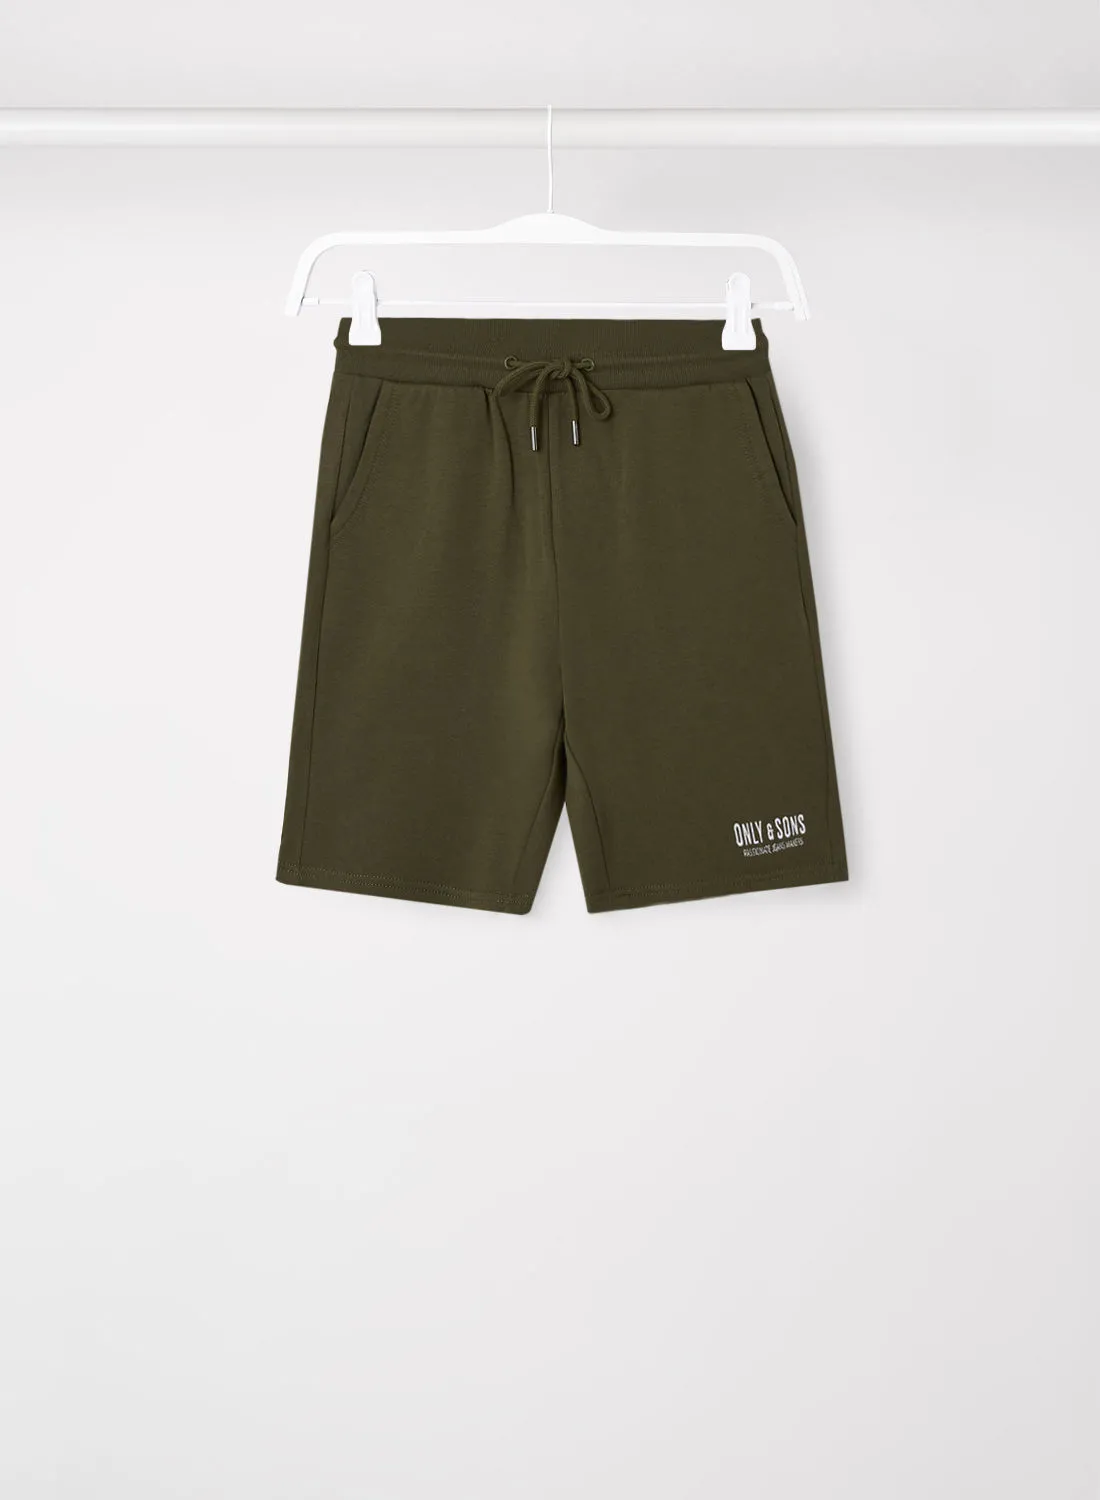 ONLY & SONS Logo Sweat Shorts